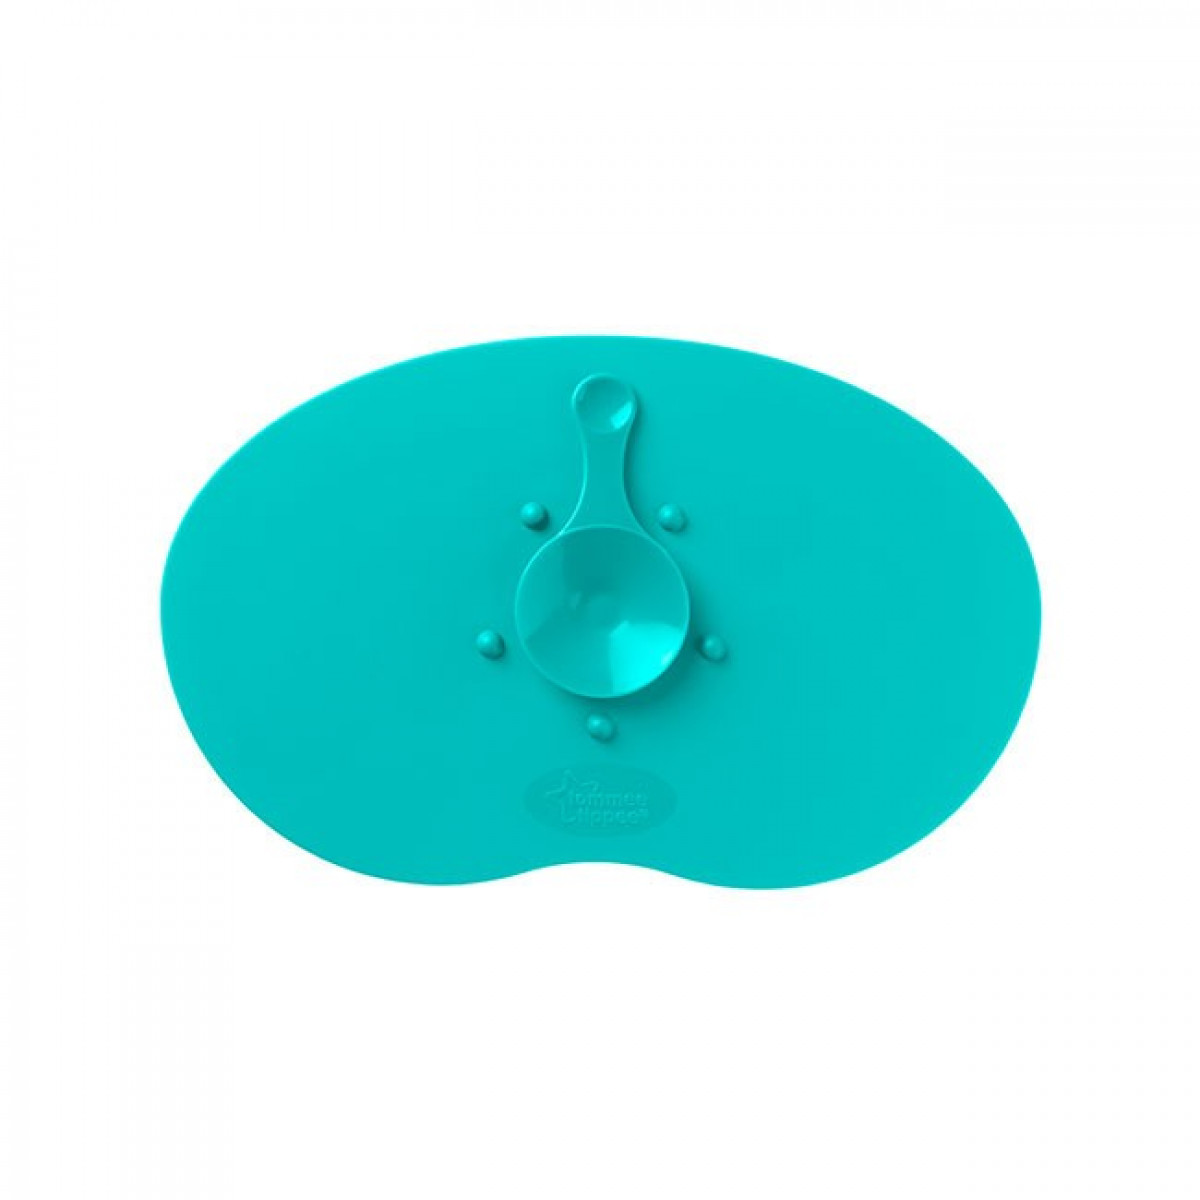 Support en silicone turquoise Tommee Tippee - photo 7